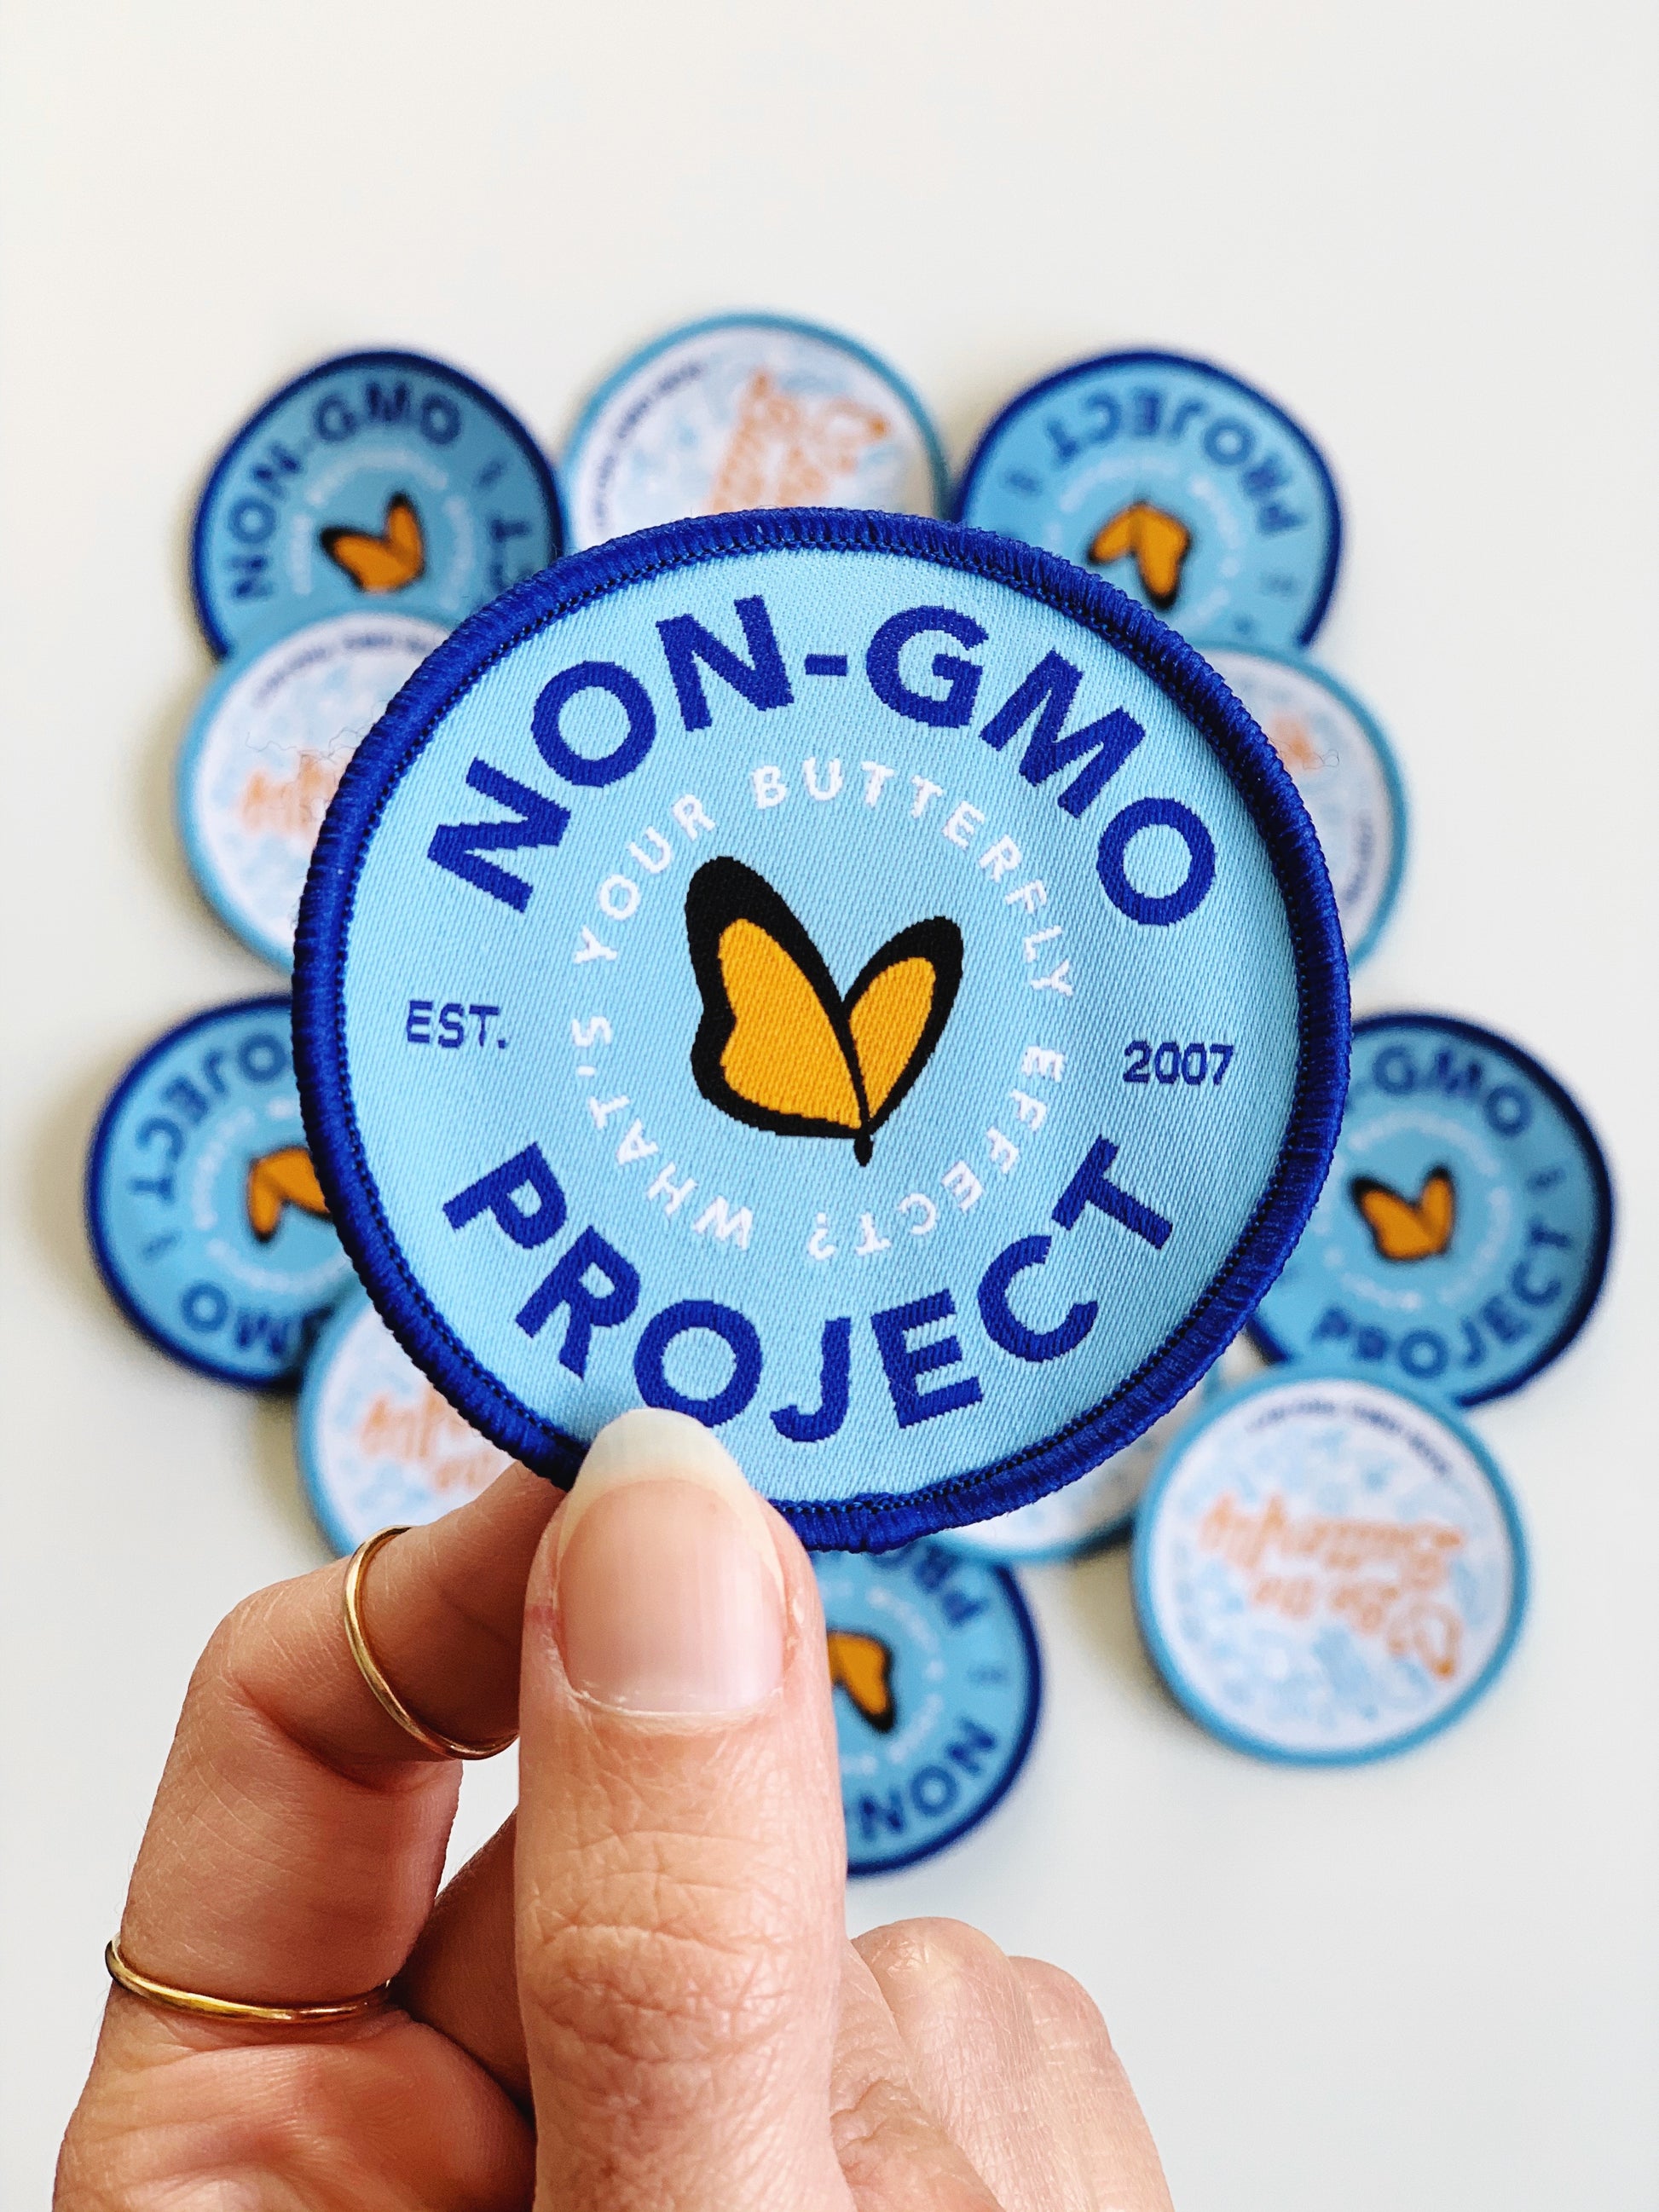 Group of Non-GMO Project patches, with in navy, light blue, and orange Non-GMO Project patch in focus